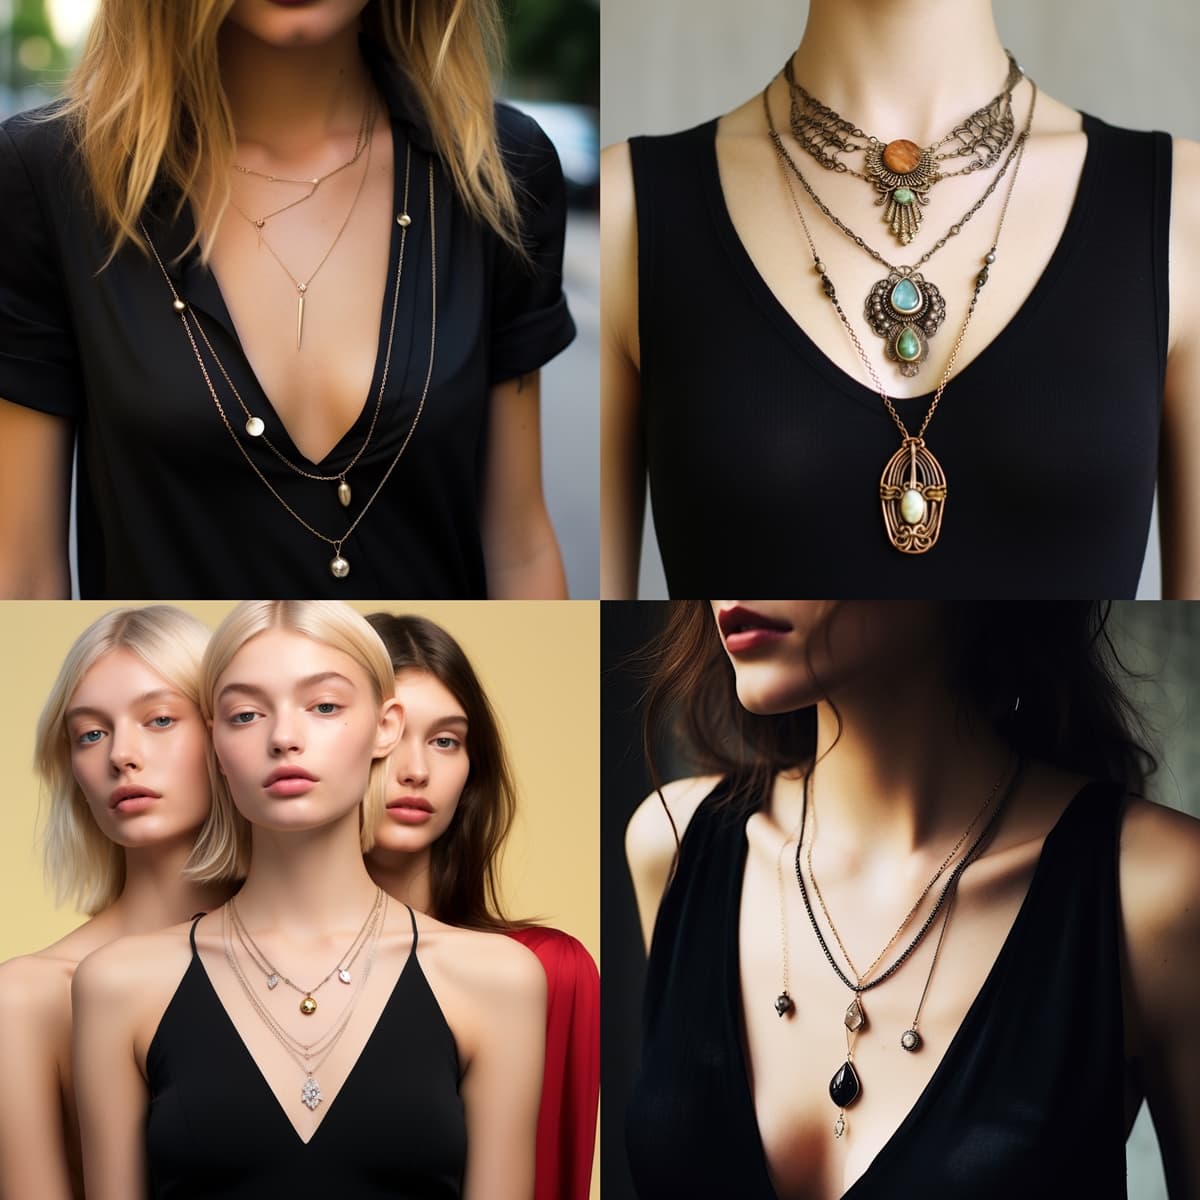 Women showcasing a range of necklaces: layered fine chains, an intricate statement piece, delicate pendants, and a series of long, elegant necklaces, each selection exemplifying the art of matching necklace lengths to personal style and neckline for a flattering look